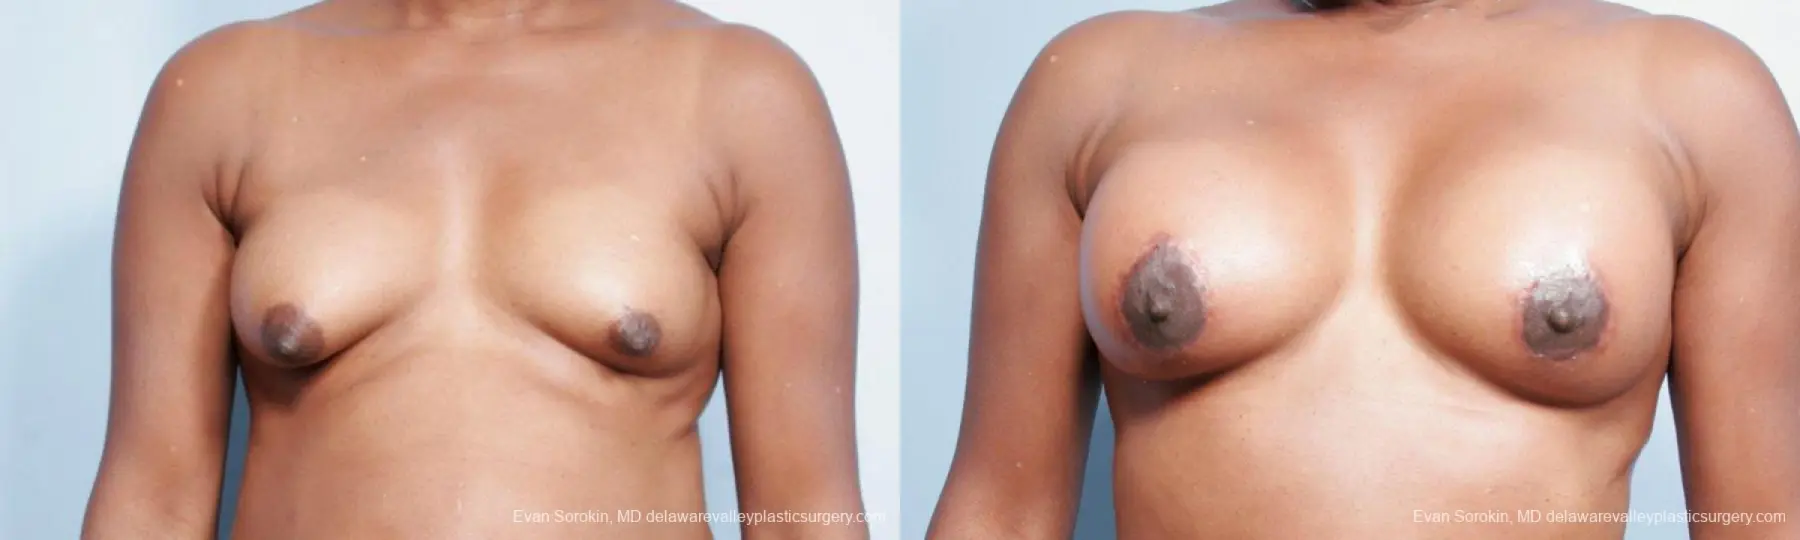 Philadelphia Breast Lift and Augmentation 9427 - Before and After 1